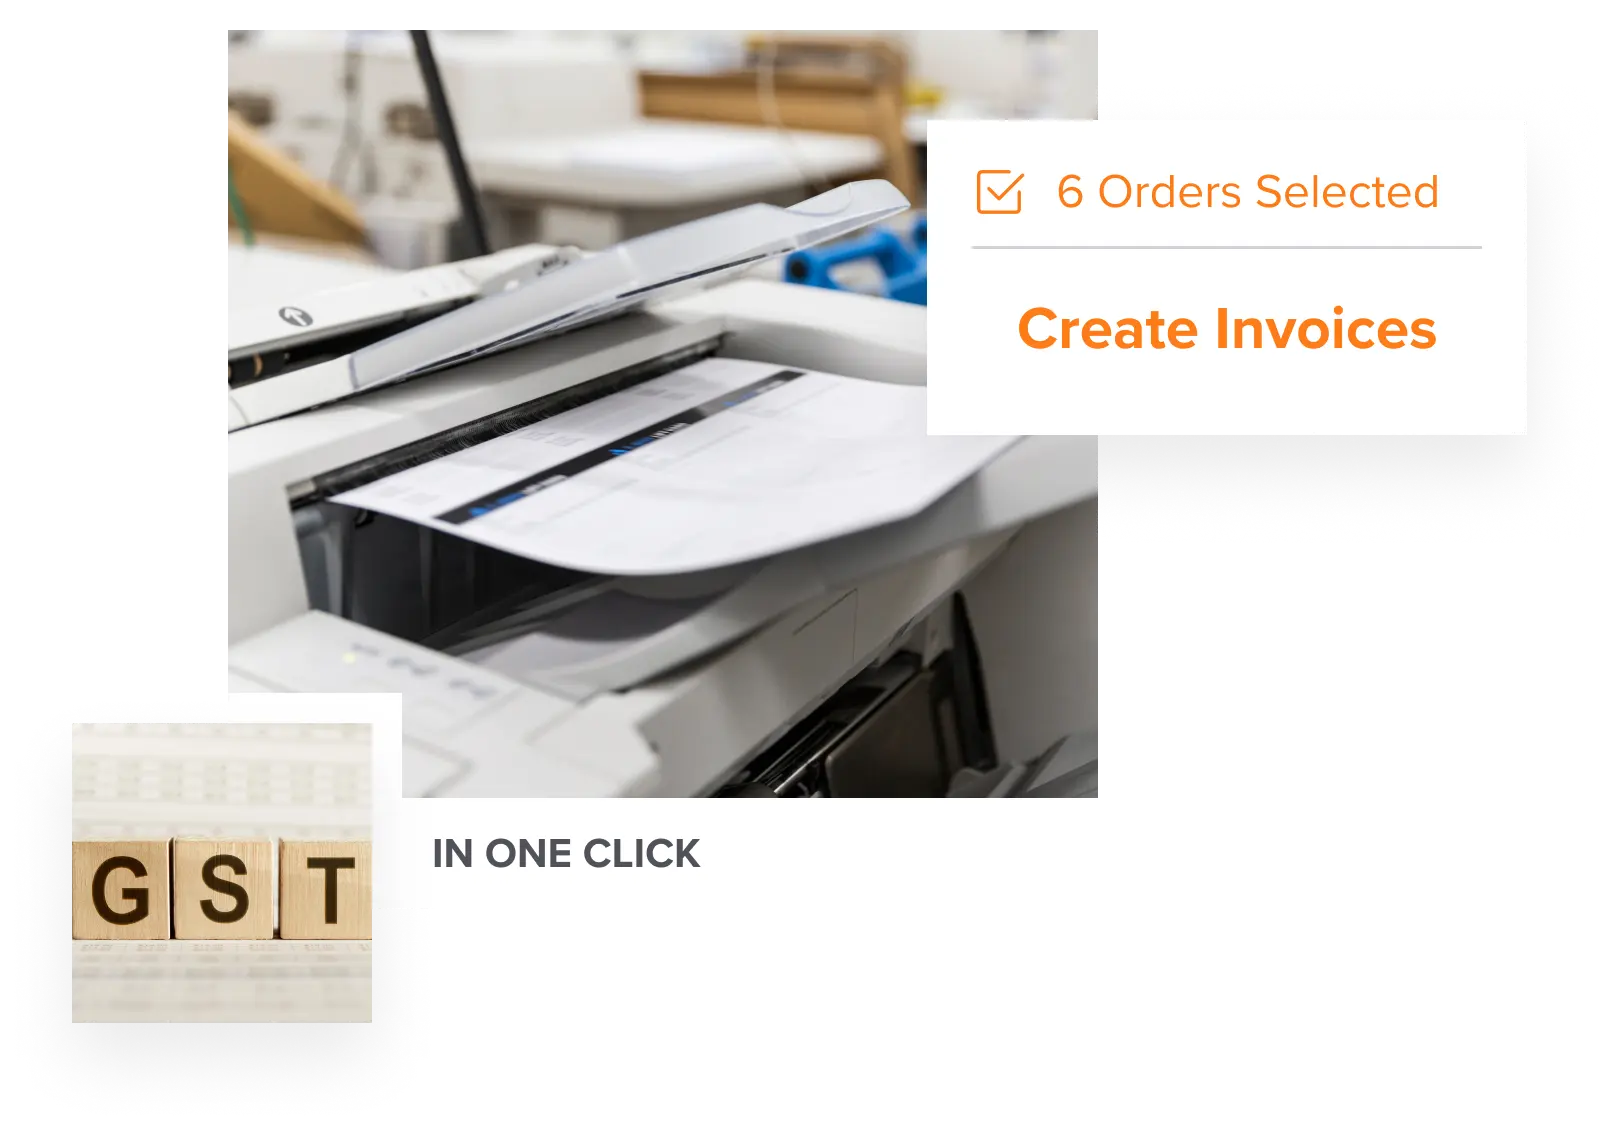 distributo-dealership-create-invoices-faster